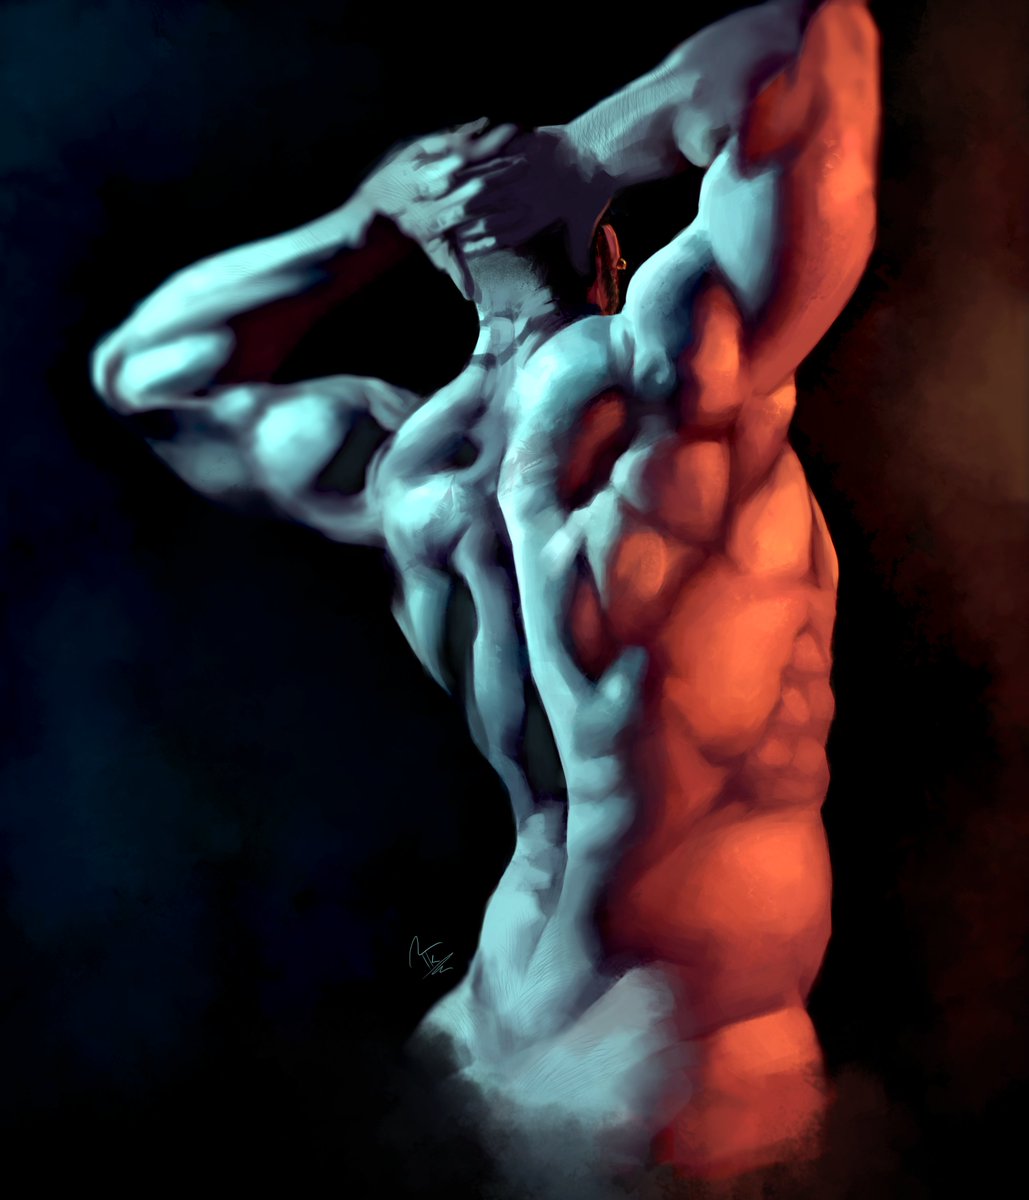 My art in case you haven't seen it - OCs and muscle studies 